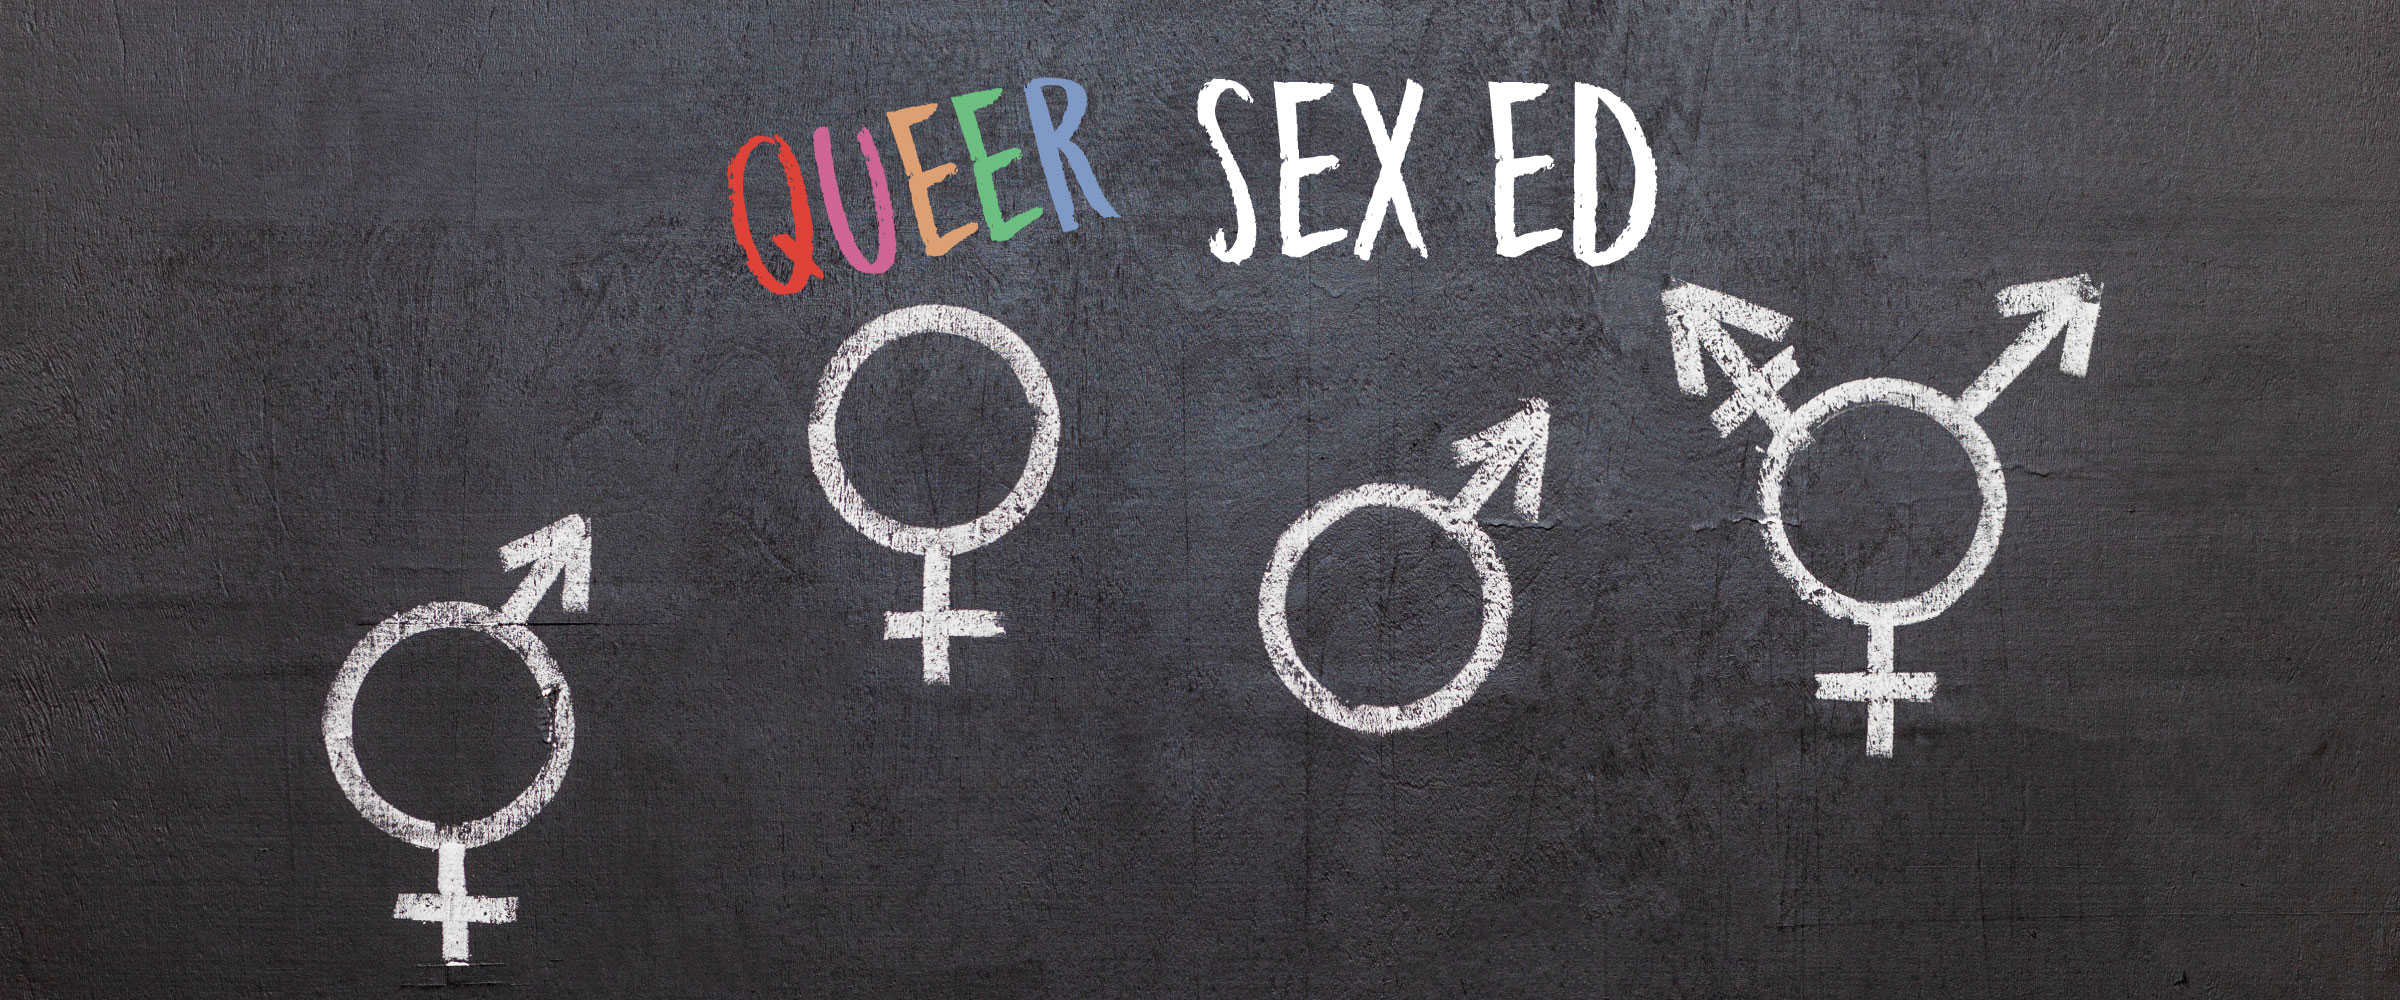 Nepali School Sex - Queer Sex Ed for Youth | Resource Center